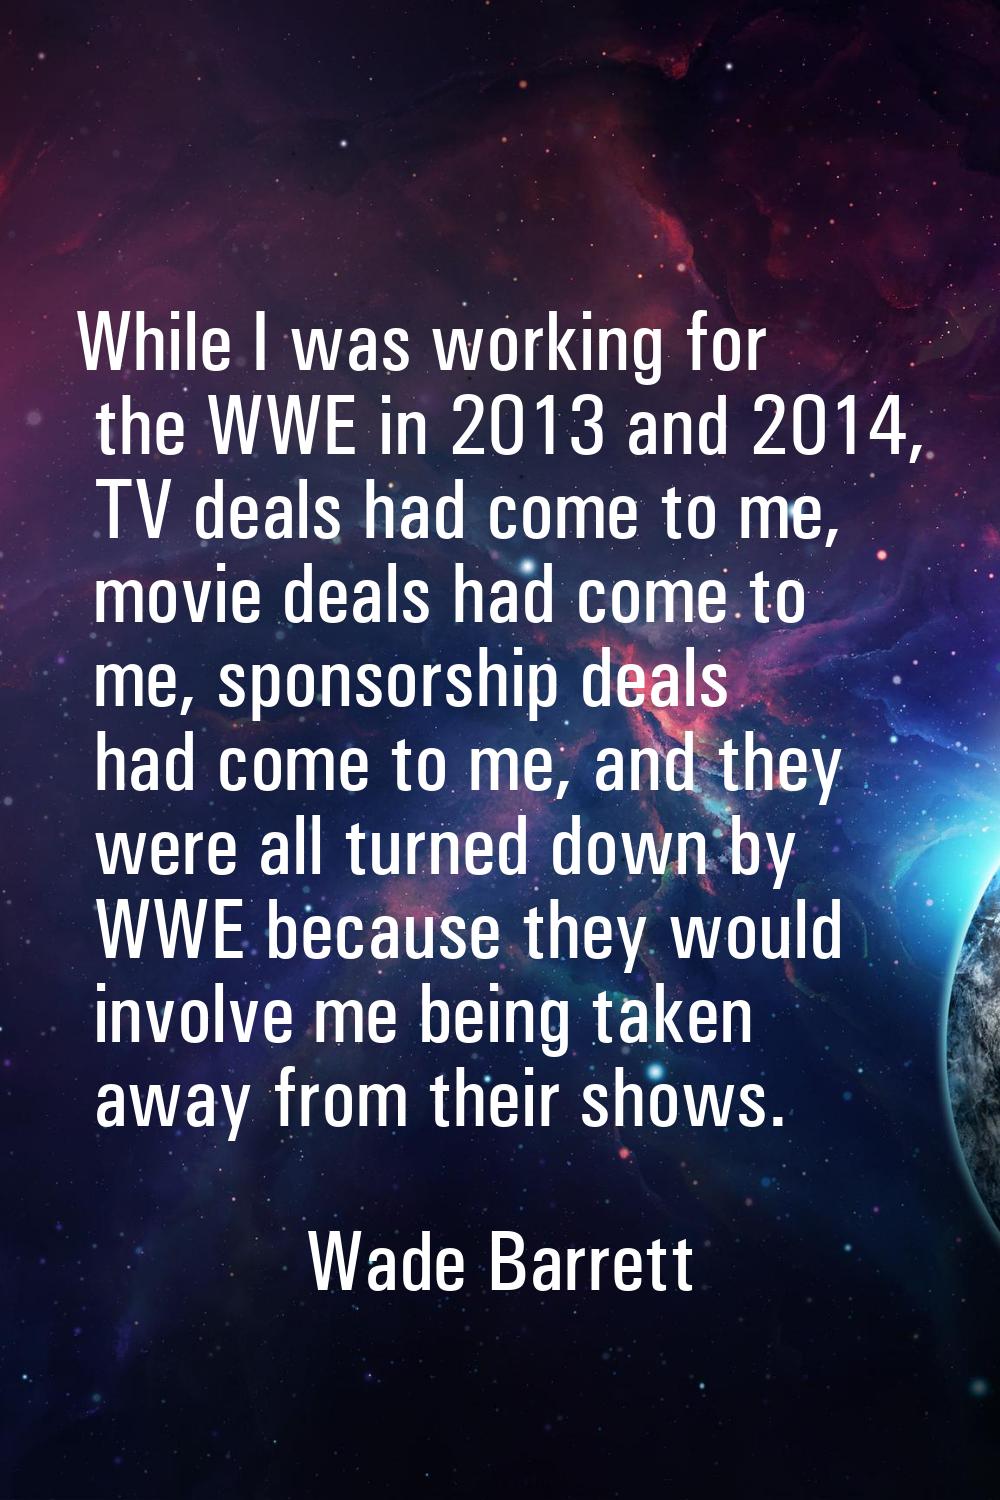 While I was working for the WWE in 2013 and 2014, TV deals had come to me, movie deals had come to 